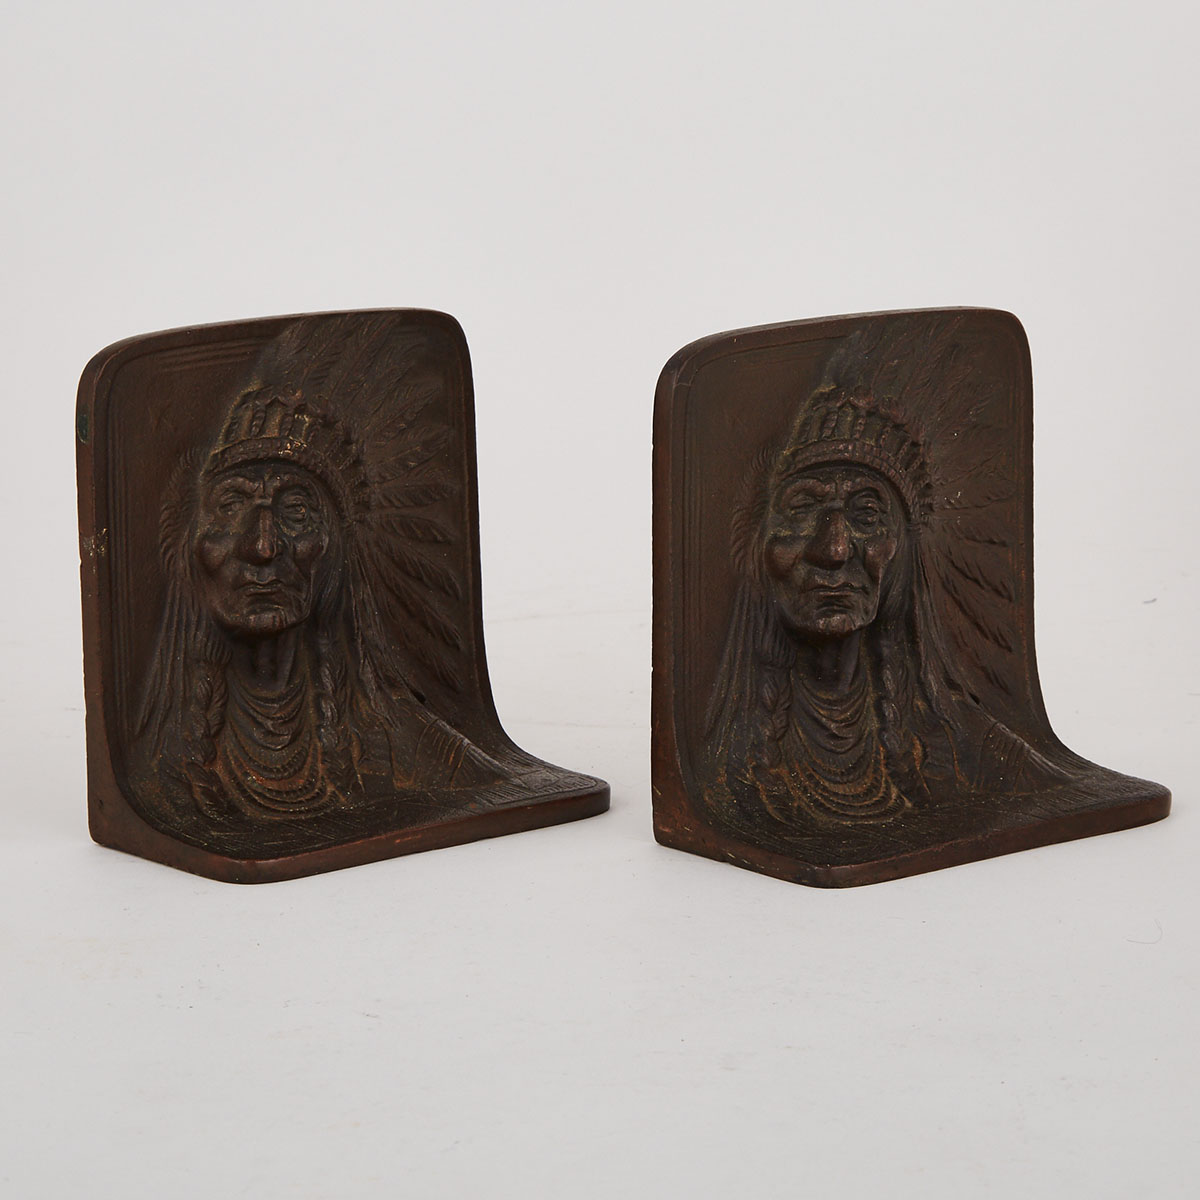 Pair of American Coppered Cast Iron ‘Indian Portrait’ Relief Bookends, c.1900